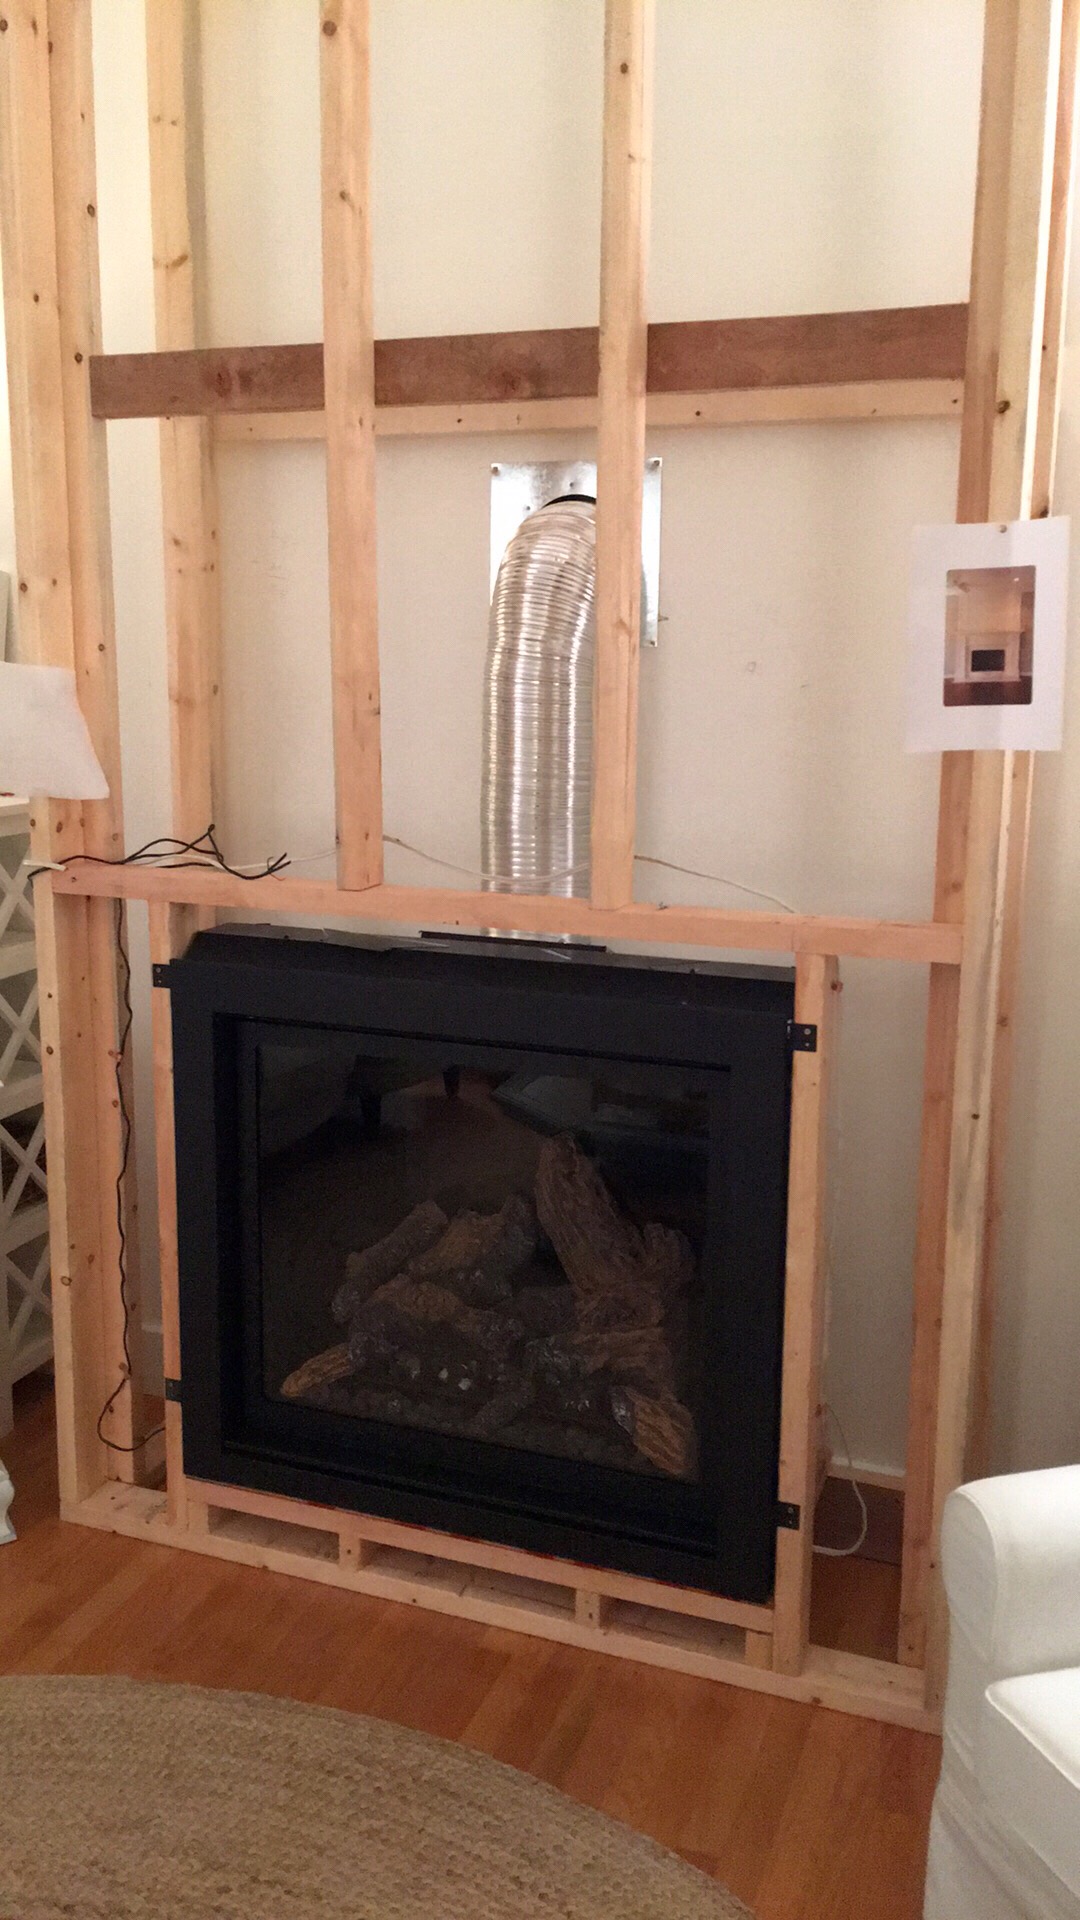 The fireplace building process.